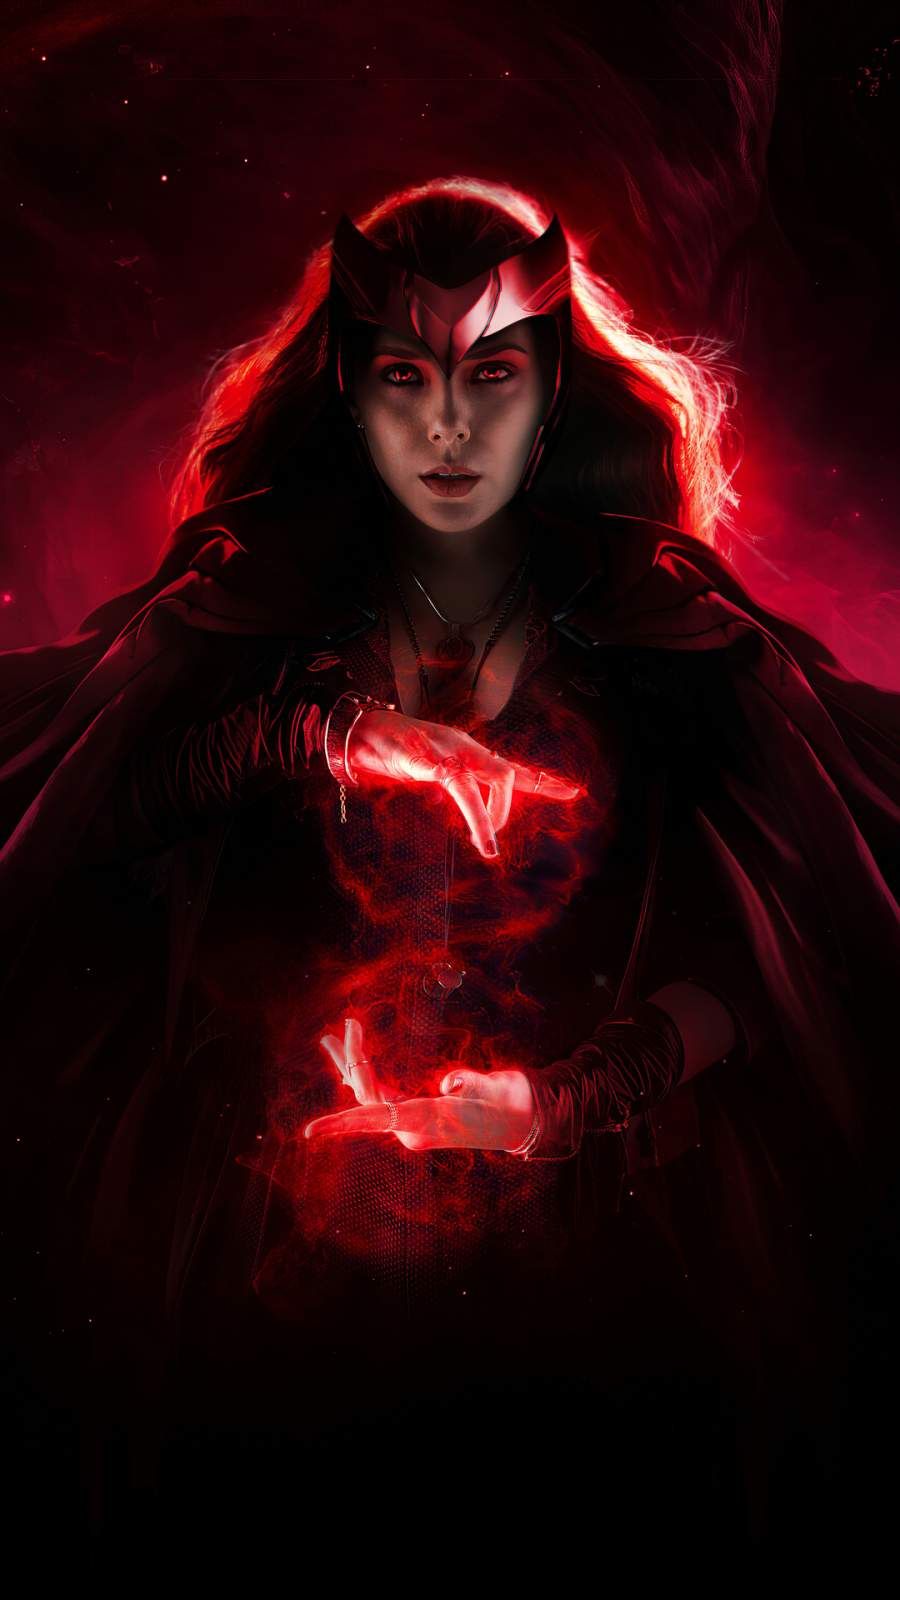 Scarlet Witch iPhone Wallpaper. Scarlet witch marvel, Scarlet witch comic, Scarlet witch avengers